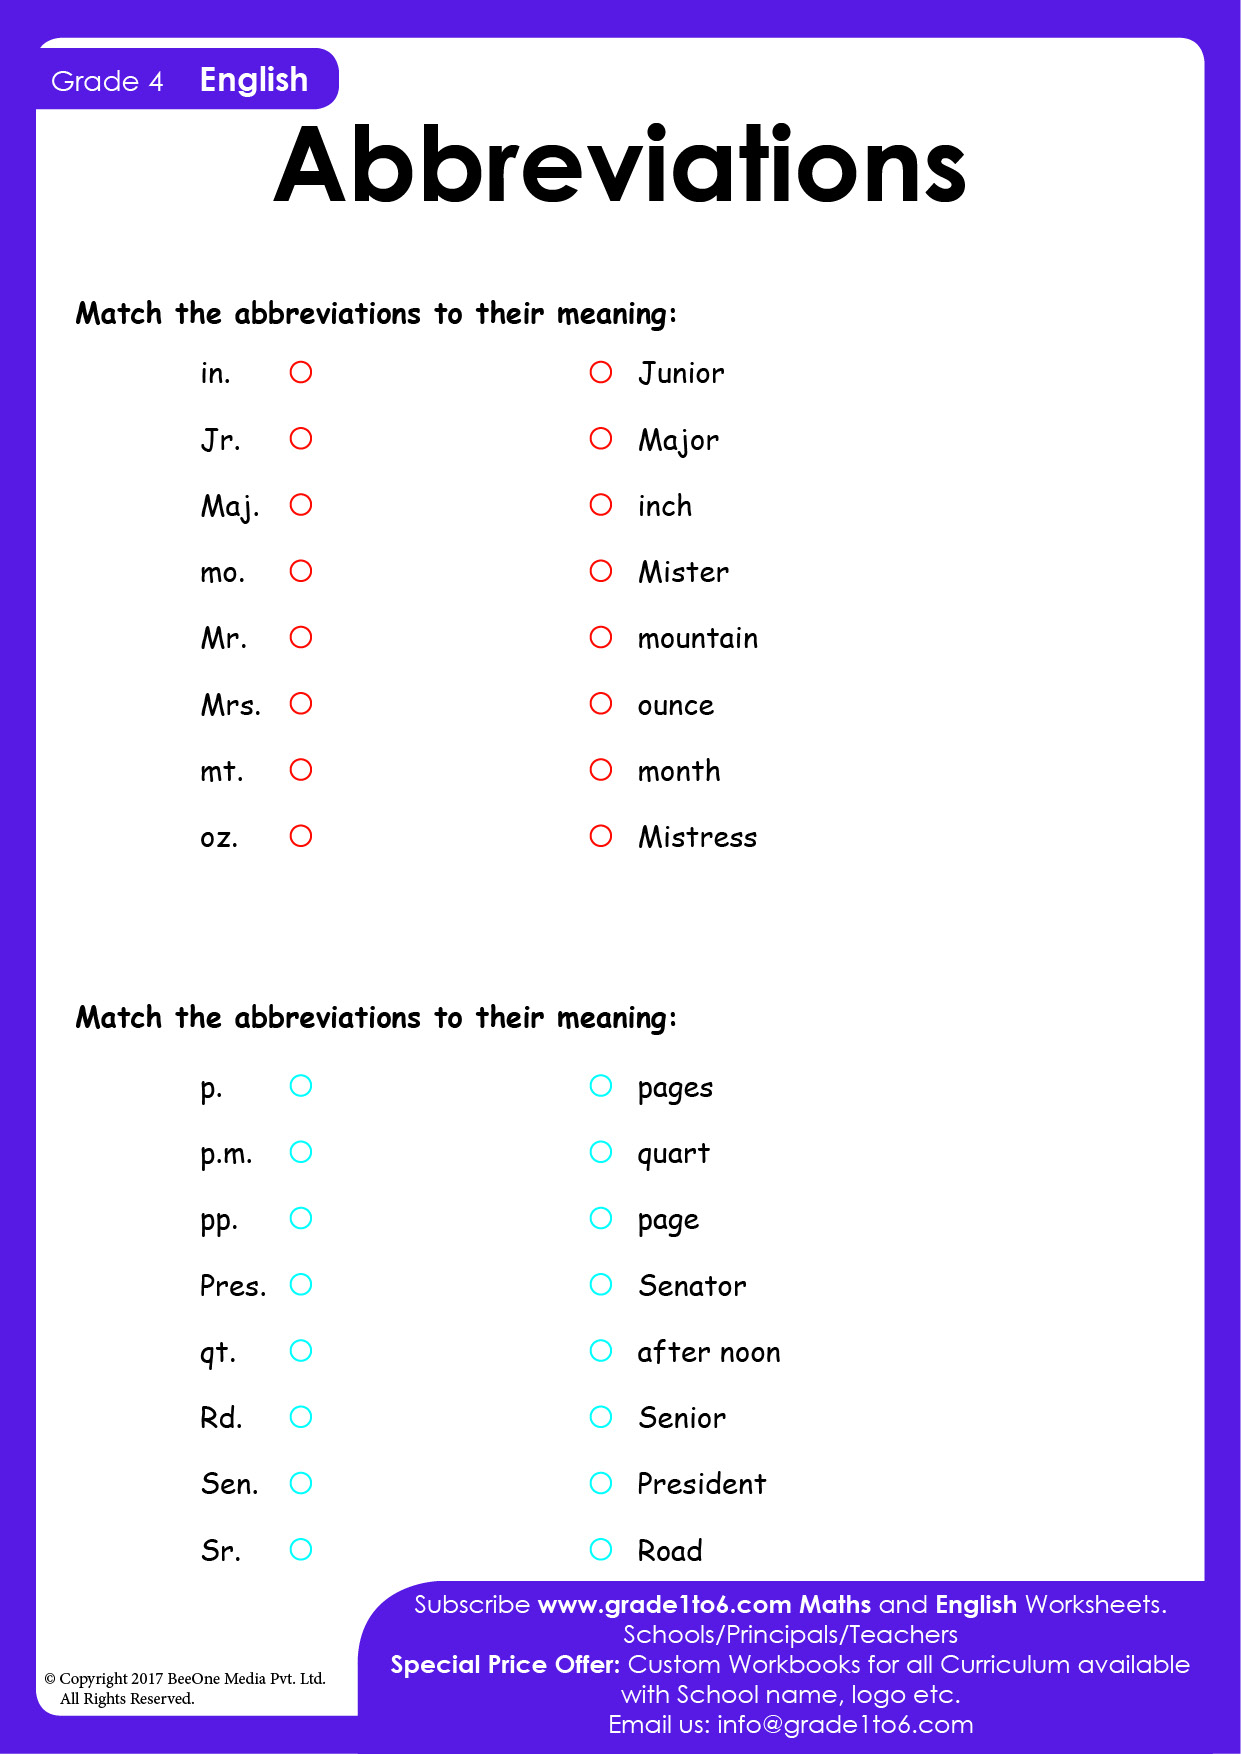 sms-abbreviations-list-of-100-most-common-abbreviations-in-english-english-study-online